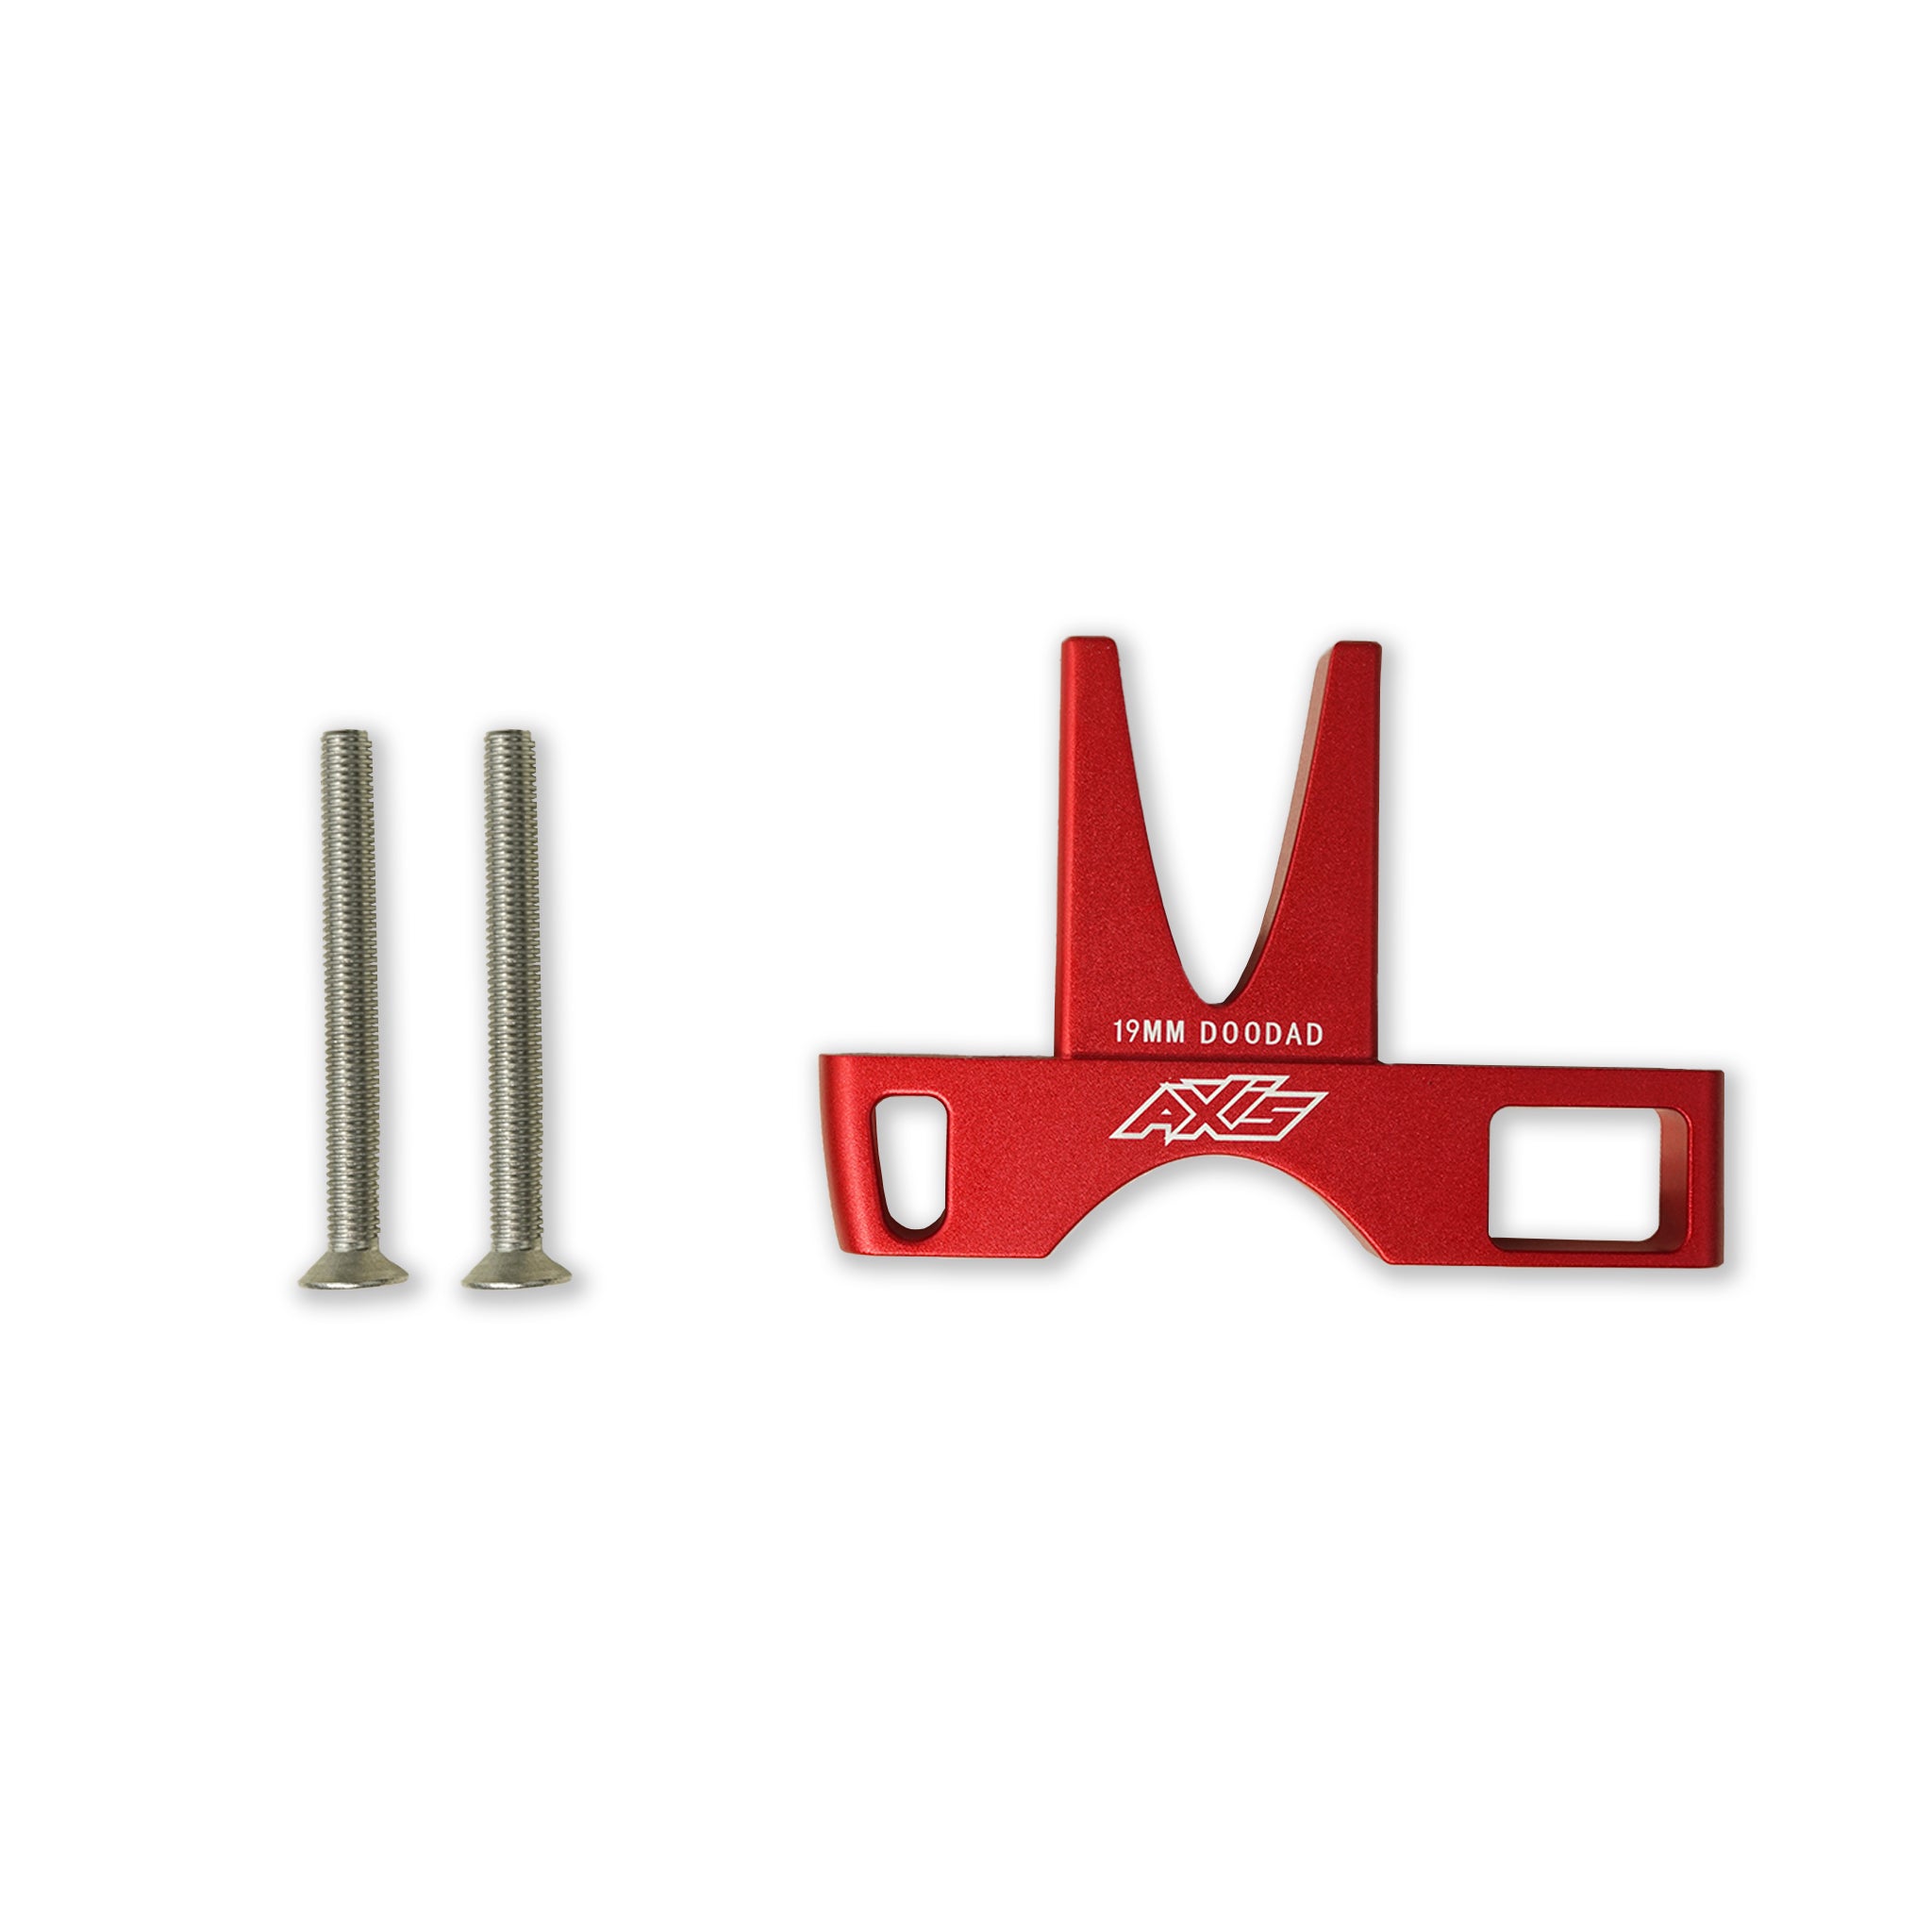 Foil Drive AXIS Fuselage to 19mm Mast Adapter / Doodad